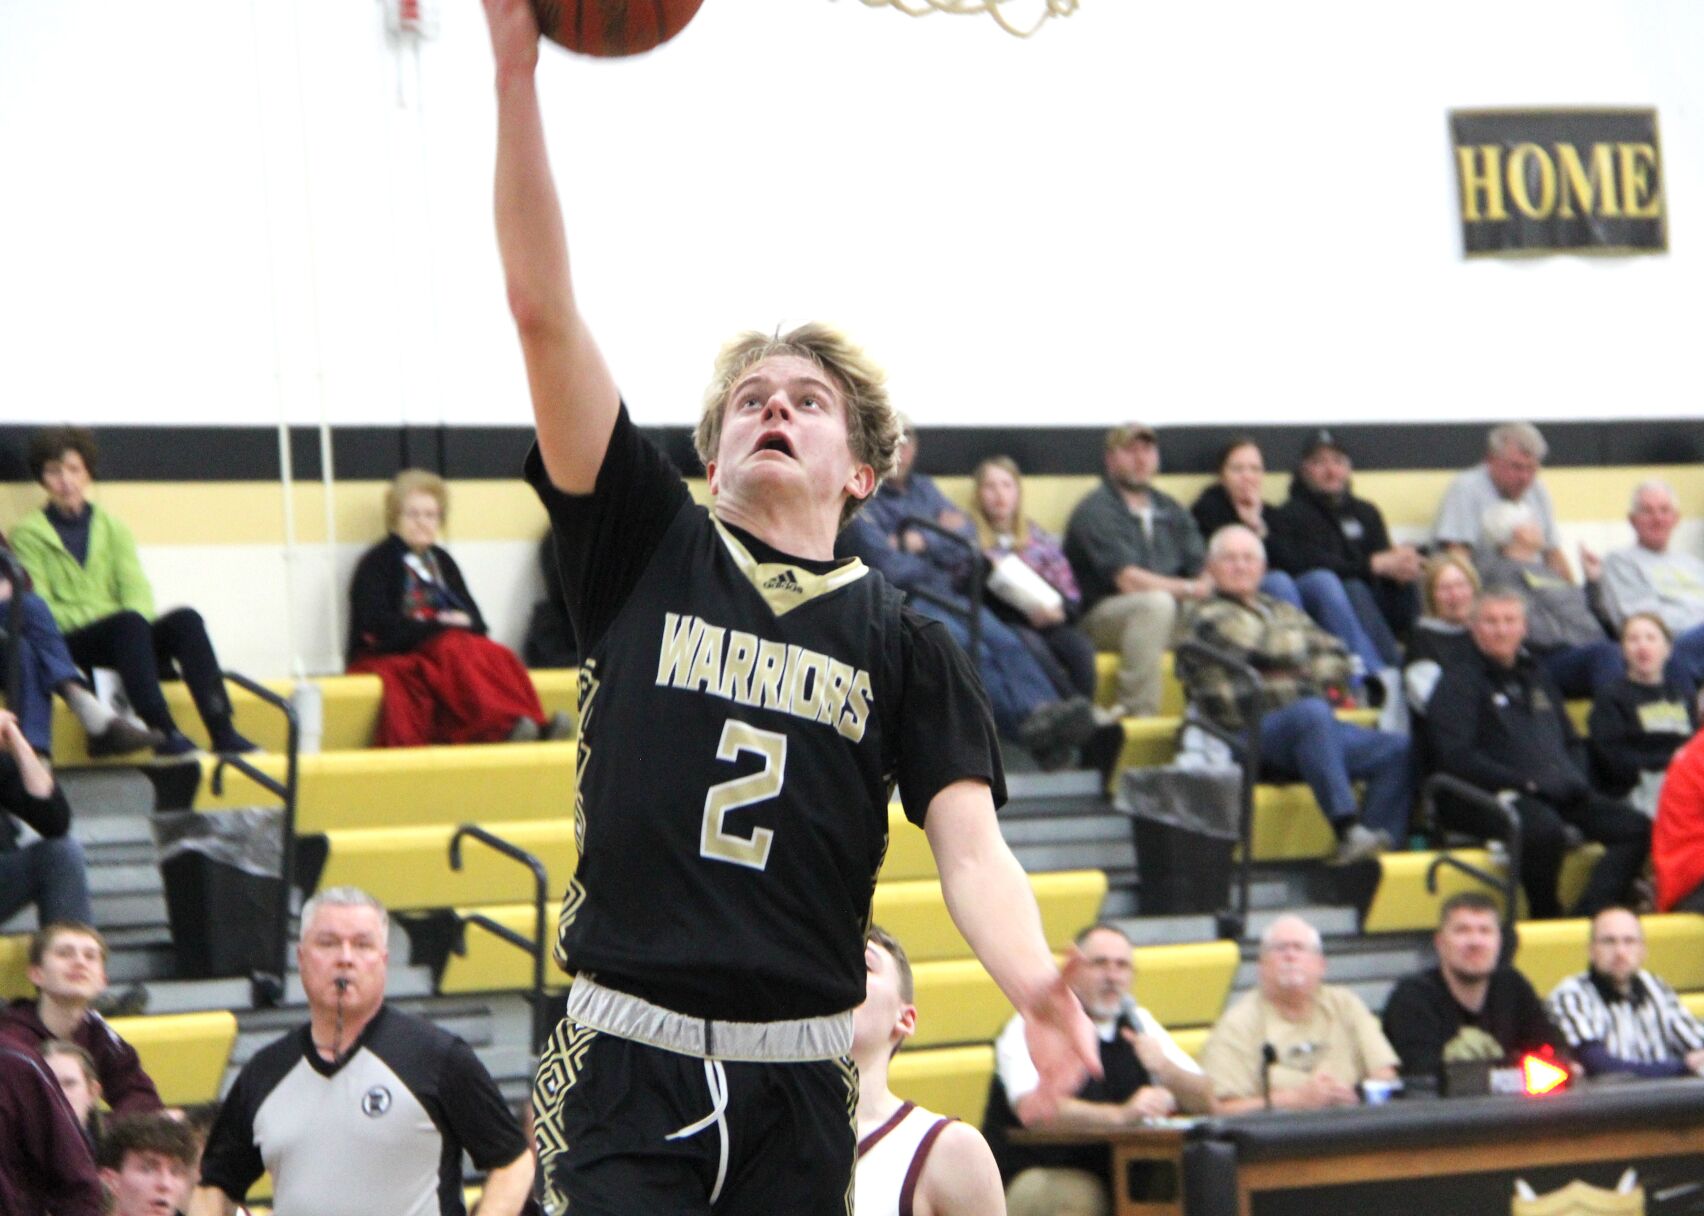 Warriors boys basketball eliminates Chatfield to advance in Sections, Doyle gets 1,000 points